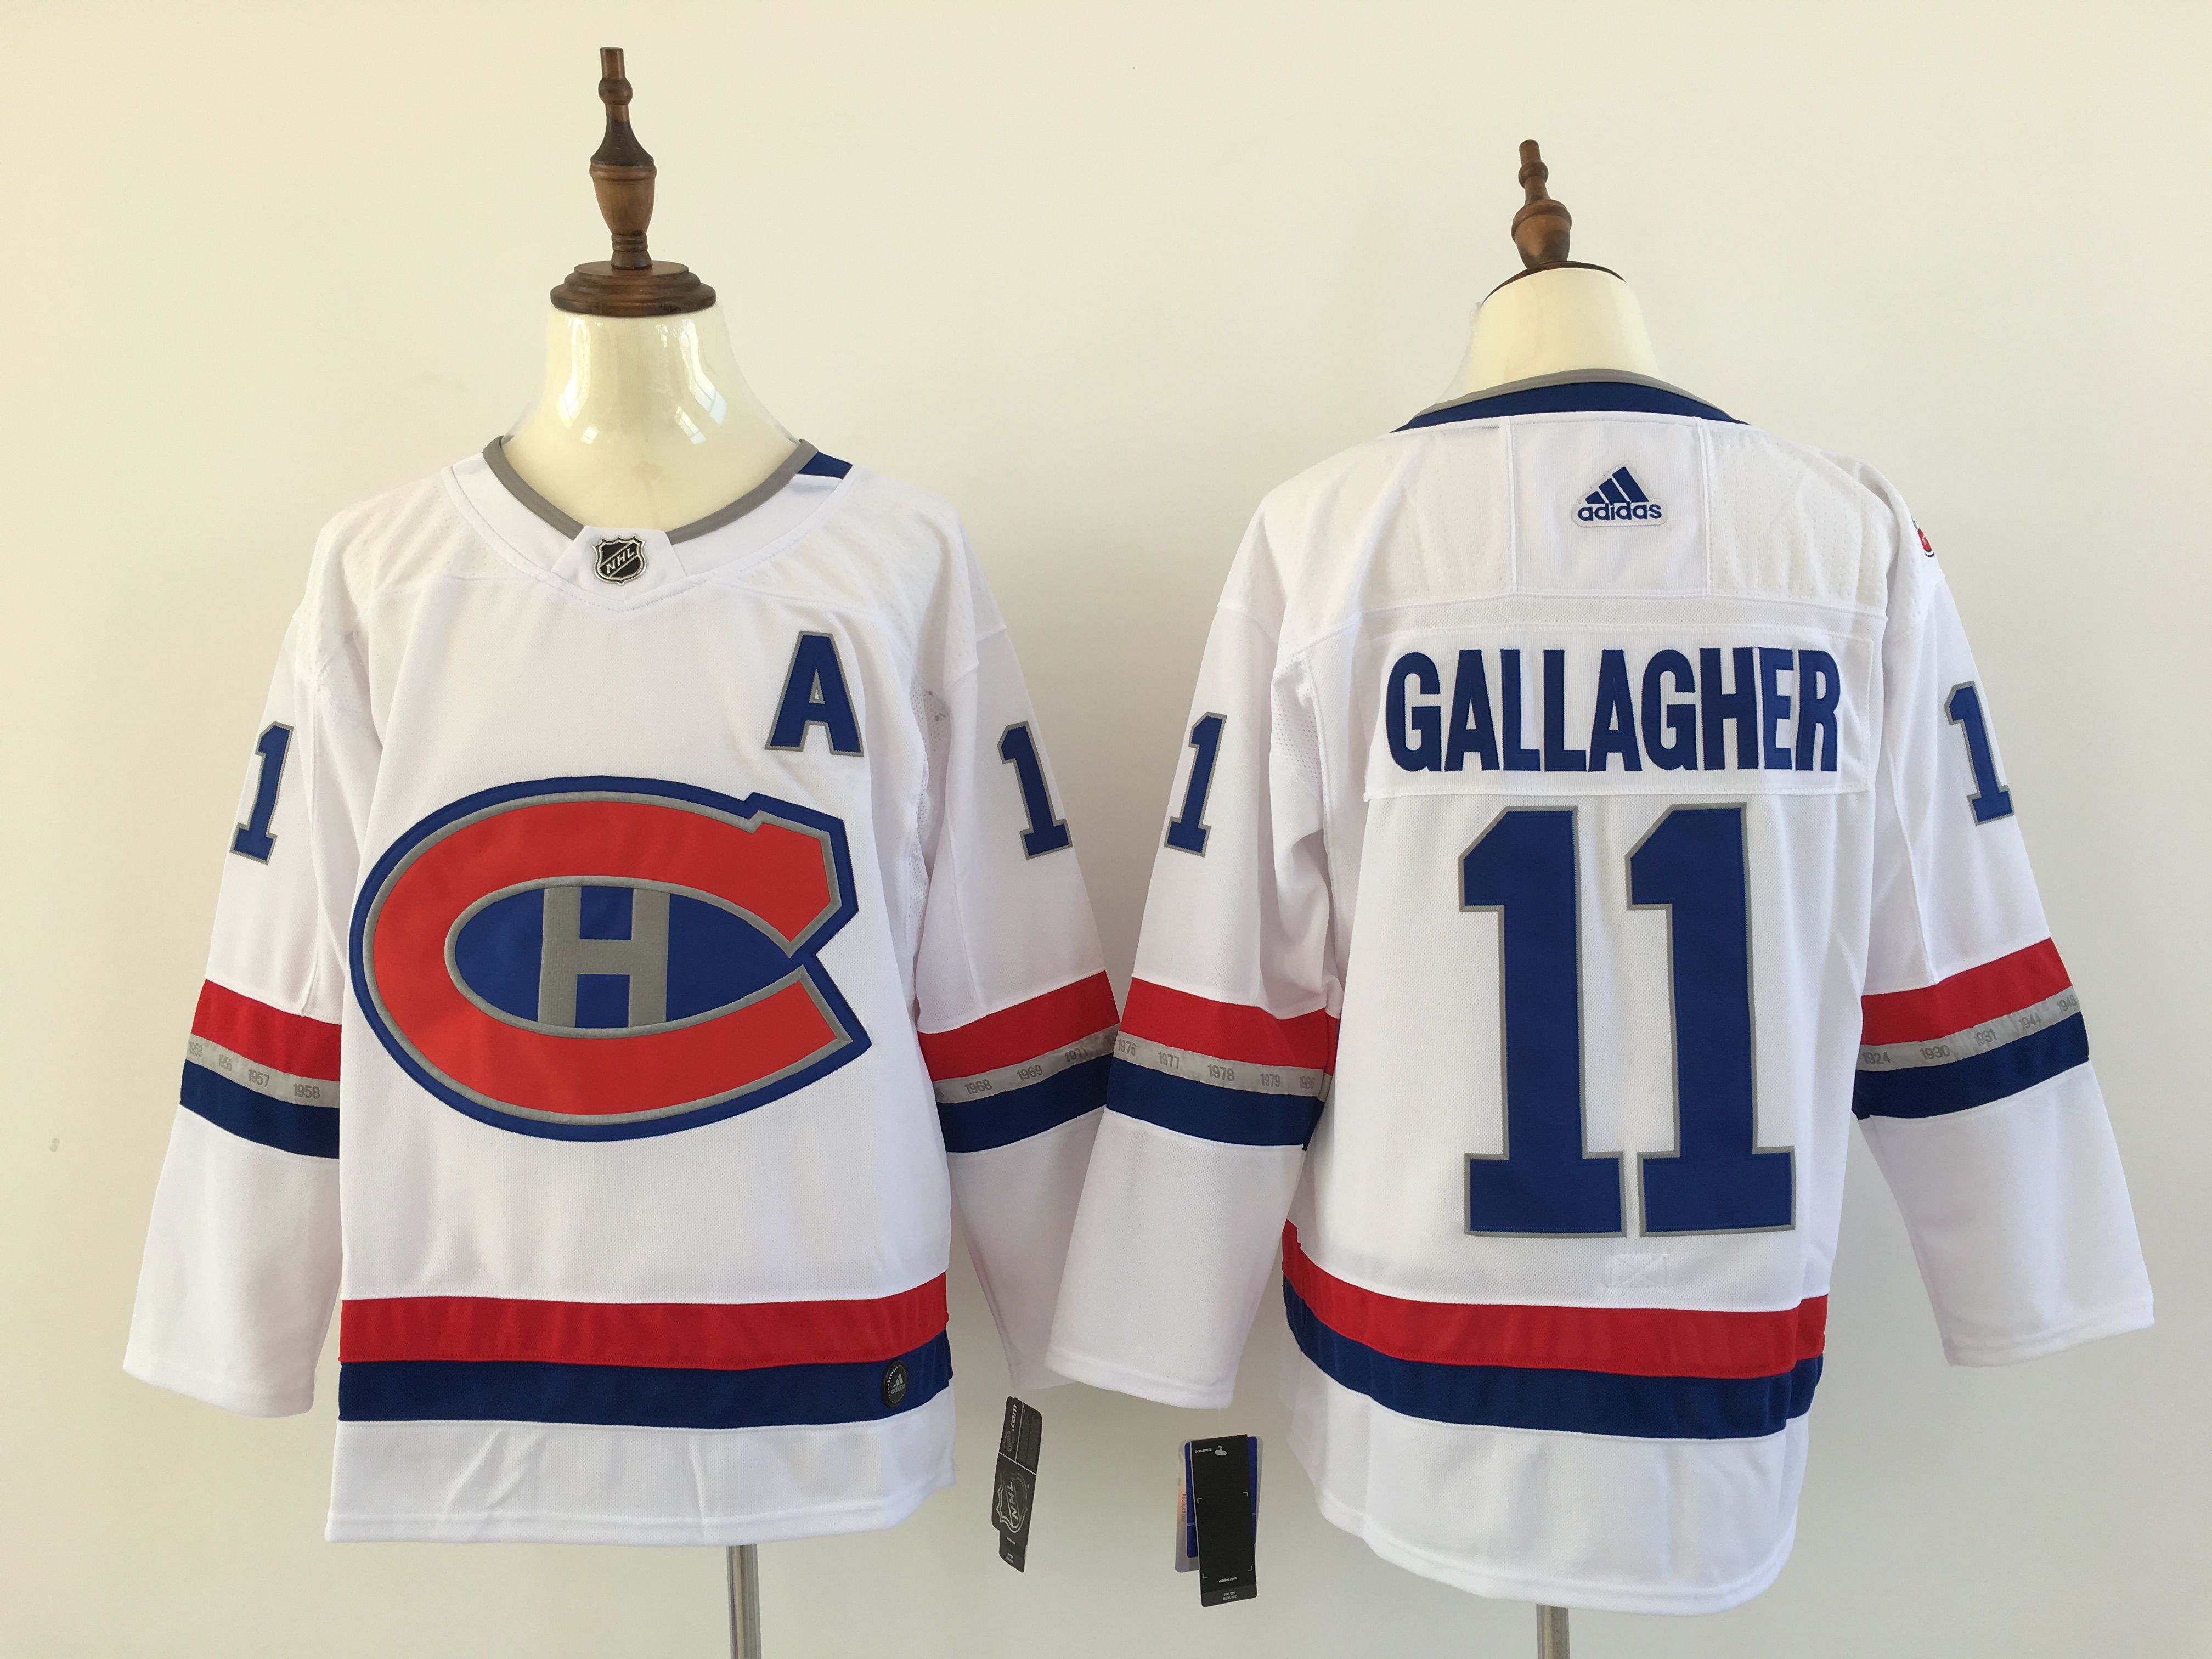 Men Montreal Canadiens 11 Gallagher White Hockey Stitched Adidas NHL Jerseys